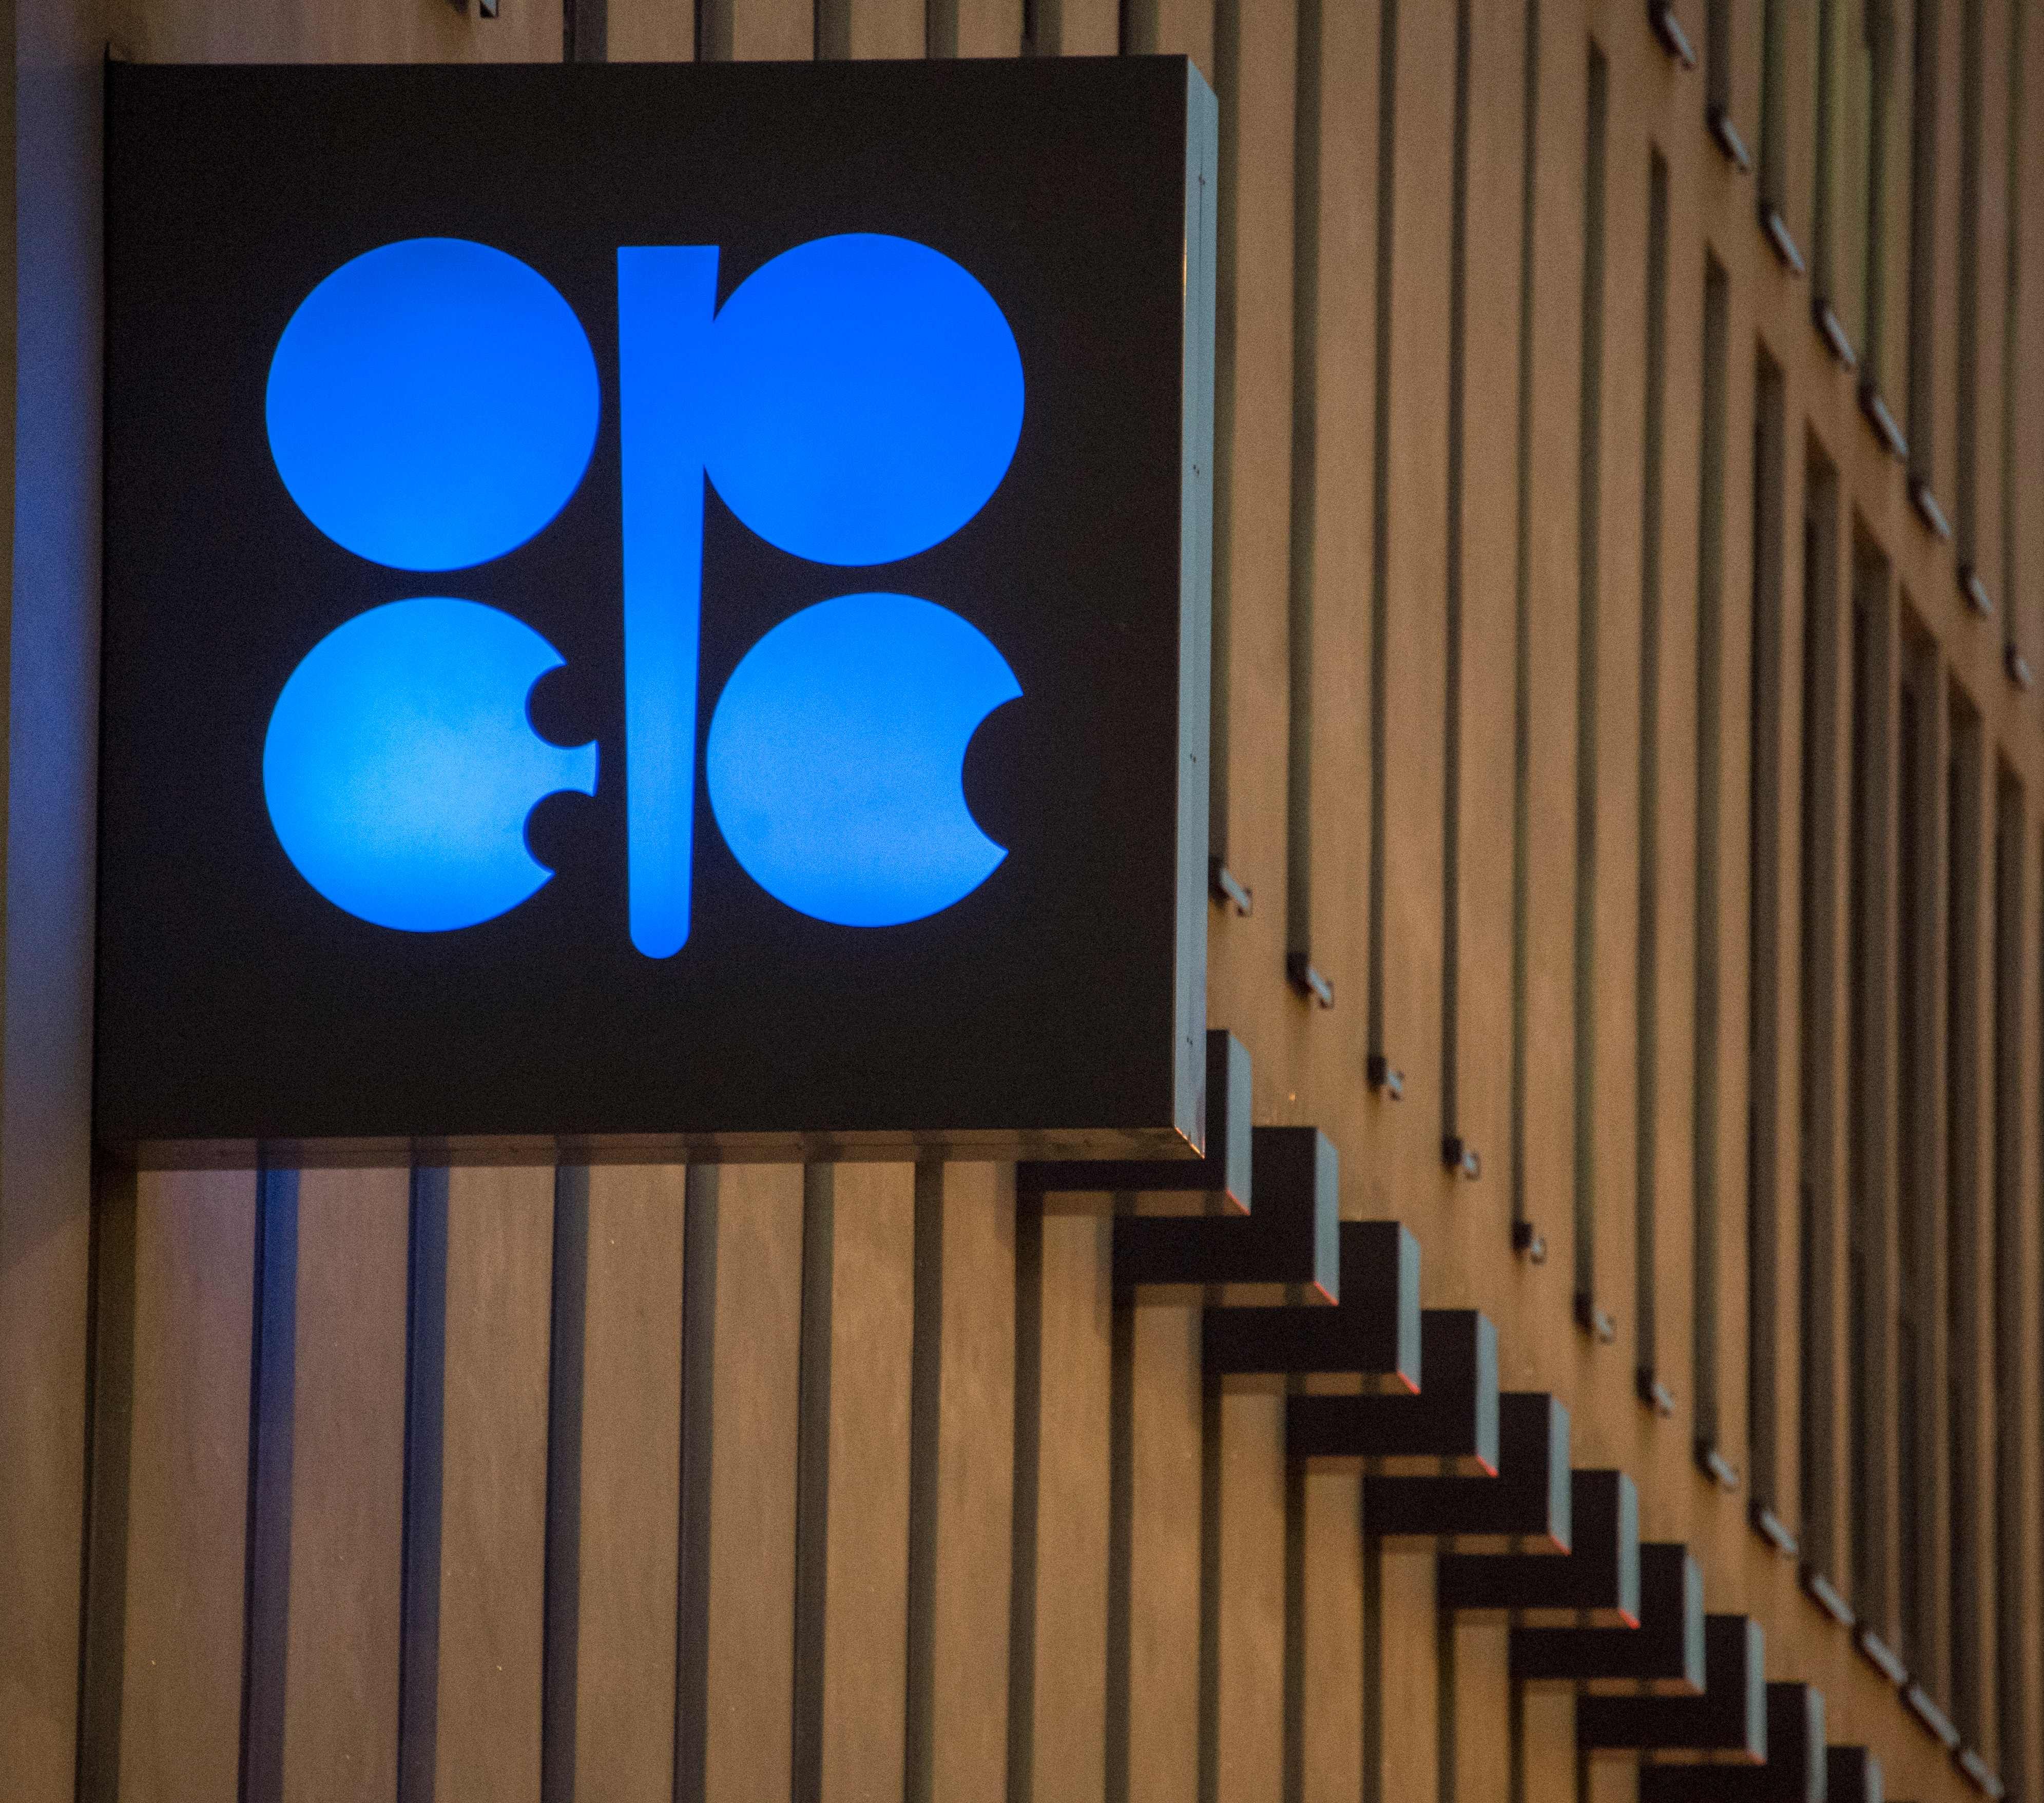 OPEC Ministers See Oil Market Balanced If Non-OPEC Joins Cut